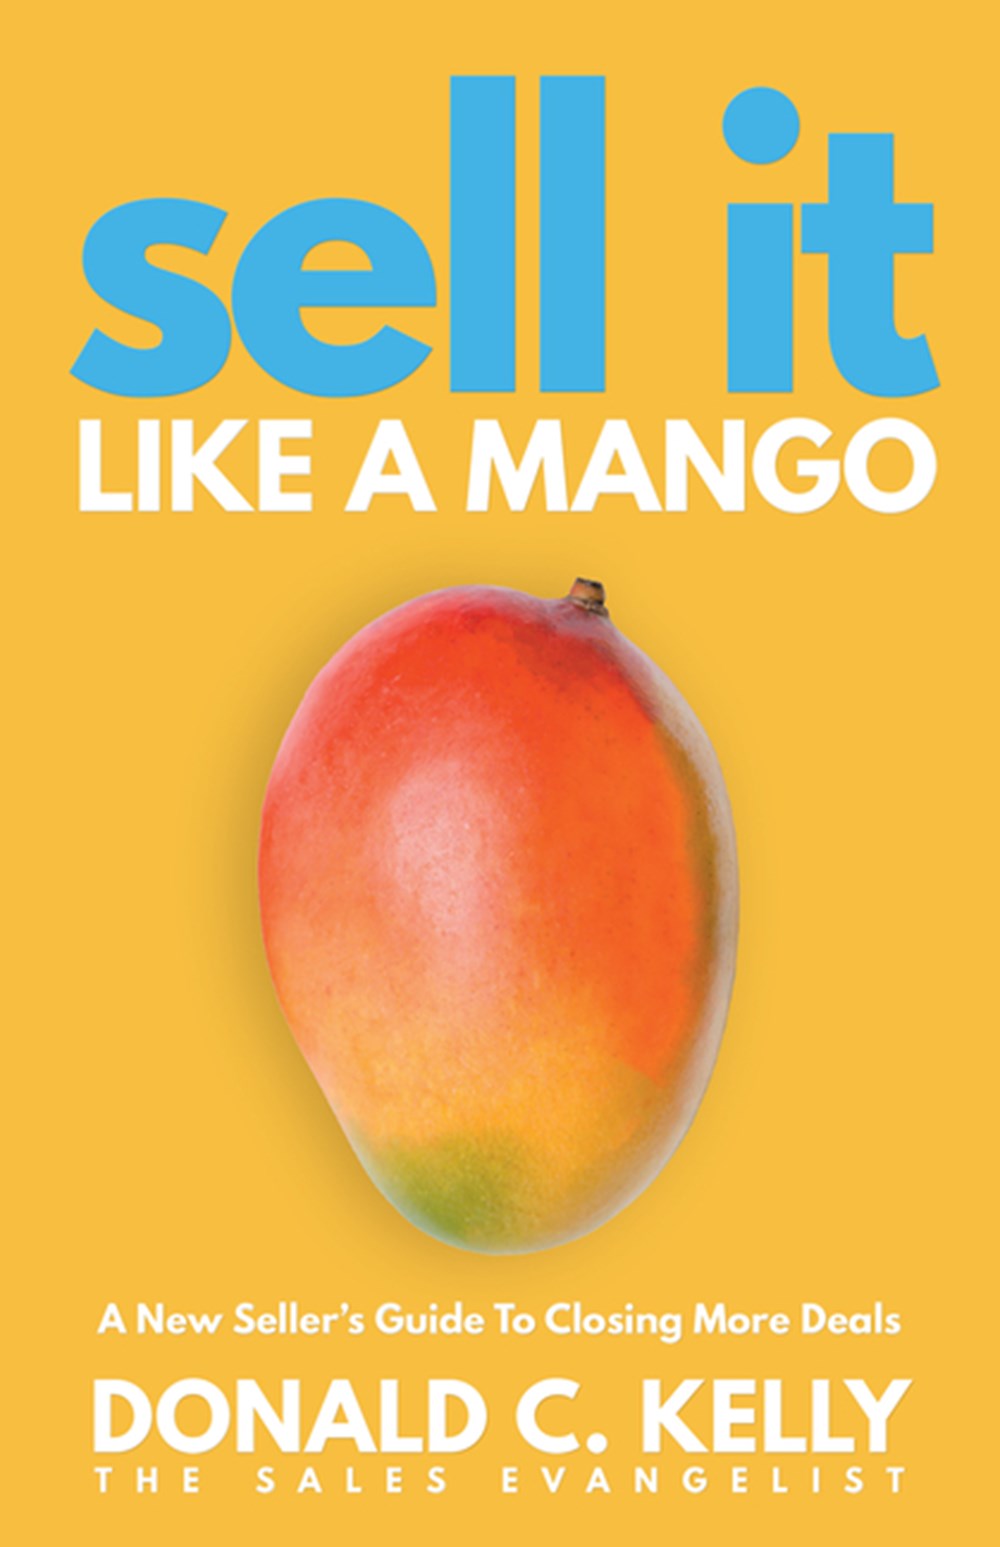 Sell It Like a Mango: A New Seller's Guide to Closing More Deals